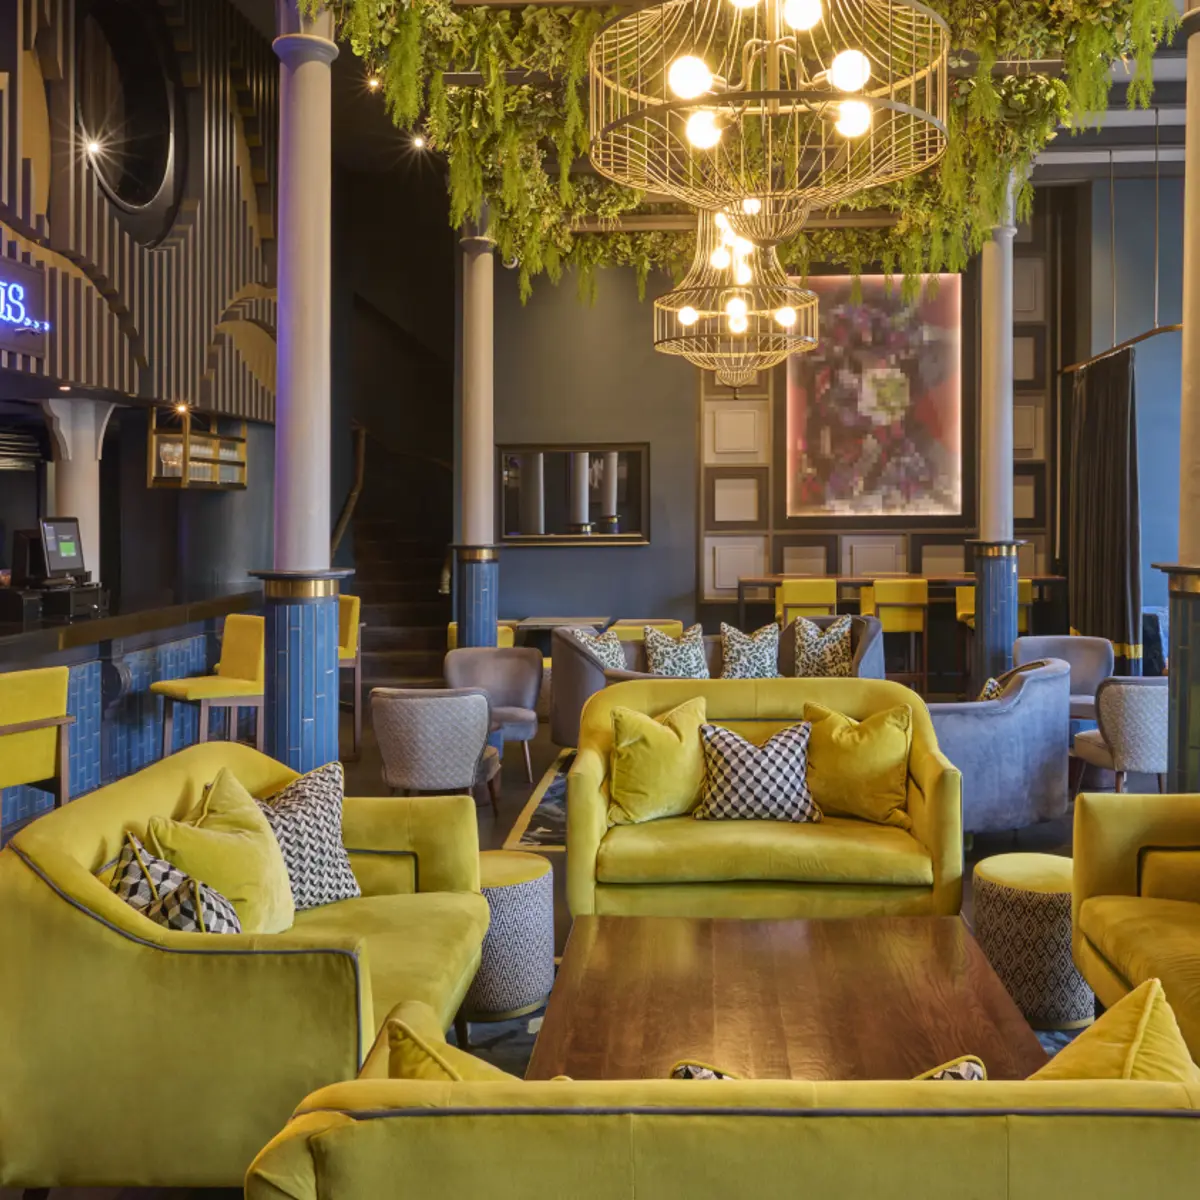 Yellow fabric sofas and bar stools prominently feature around a wooden table, with the bar in the background and a blue neon sign reading "happiness is" is displayed above the bar.